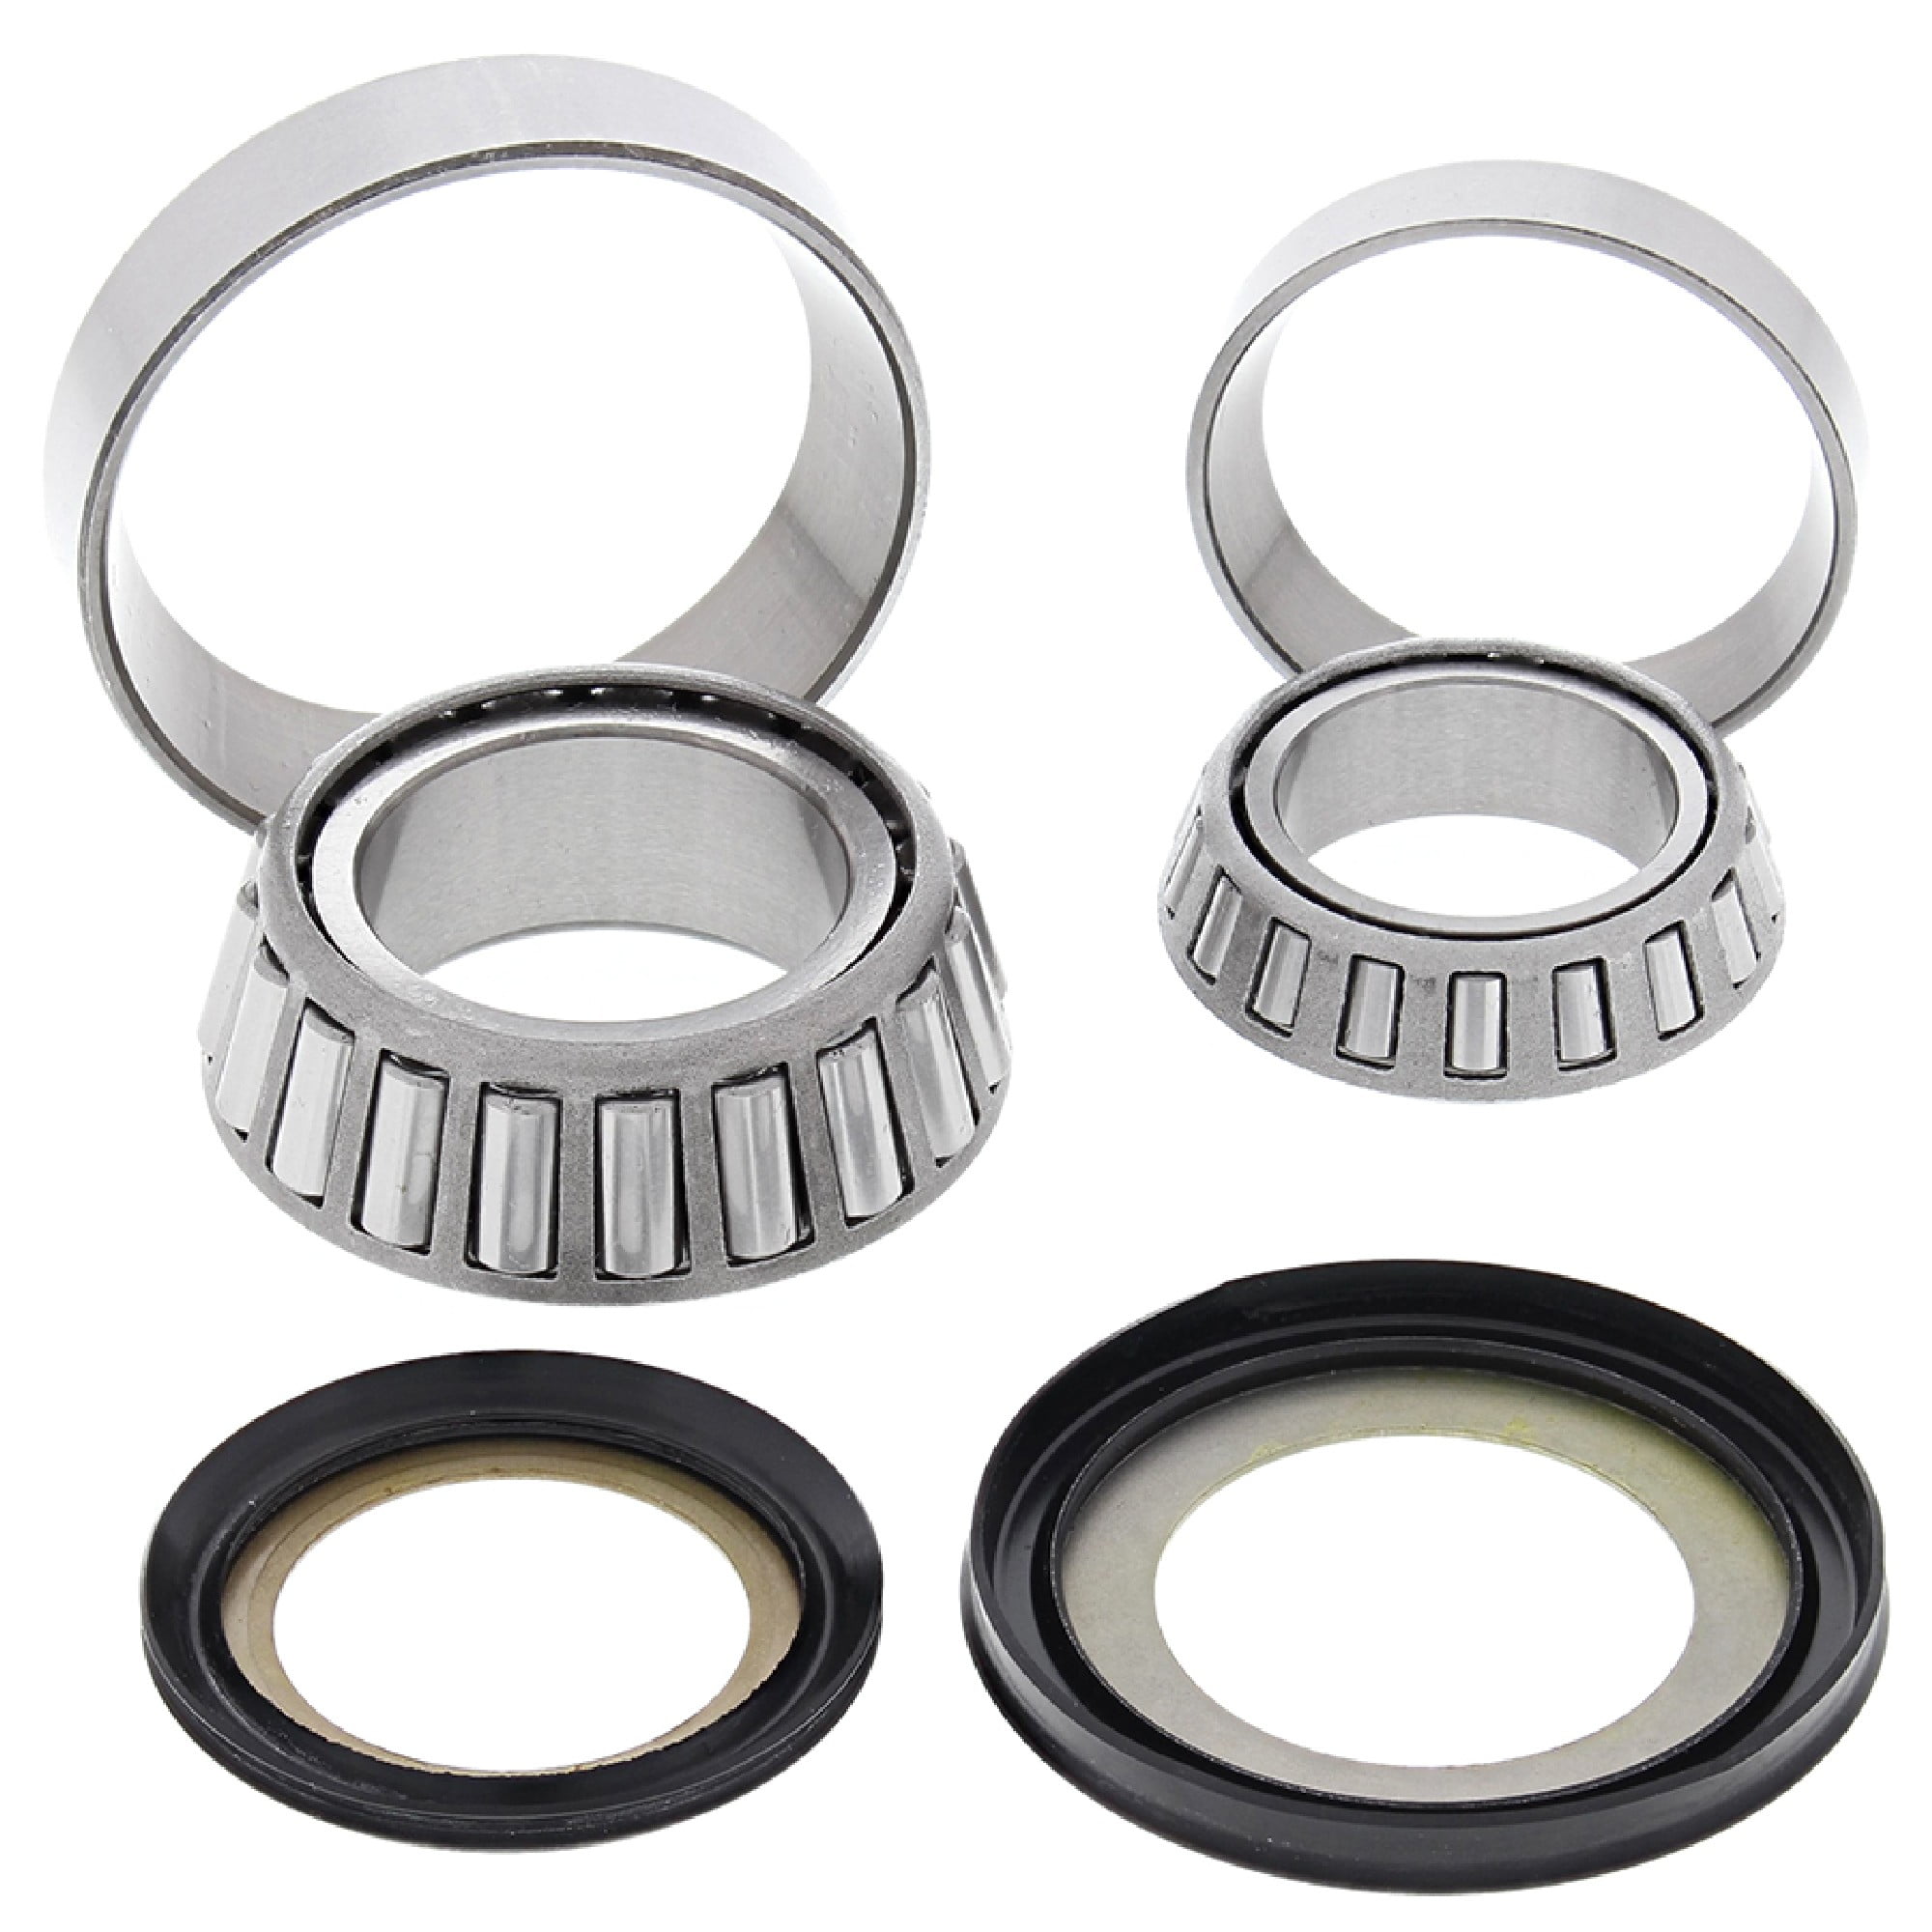 NUTS WASHERS YAMAHA DT125R DT 125 R  EXHAUST STUDS STAINLESS STEEL GASKET 